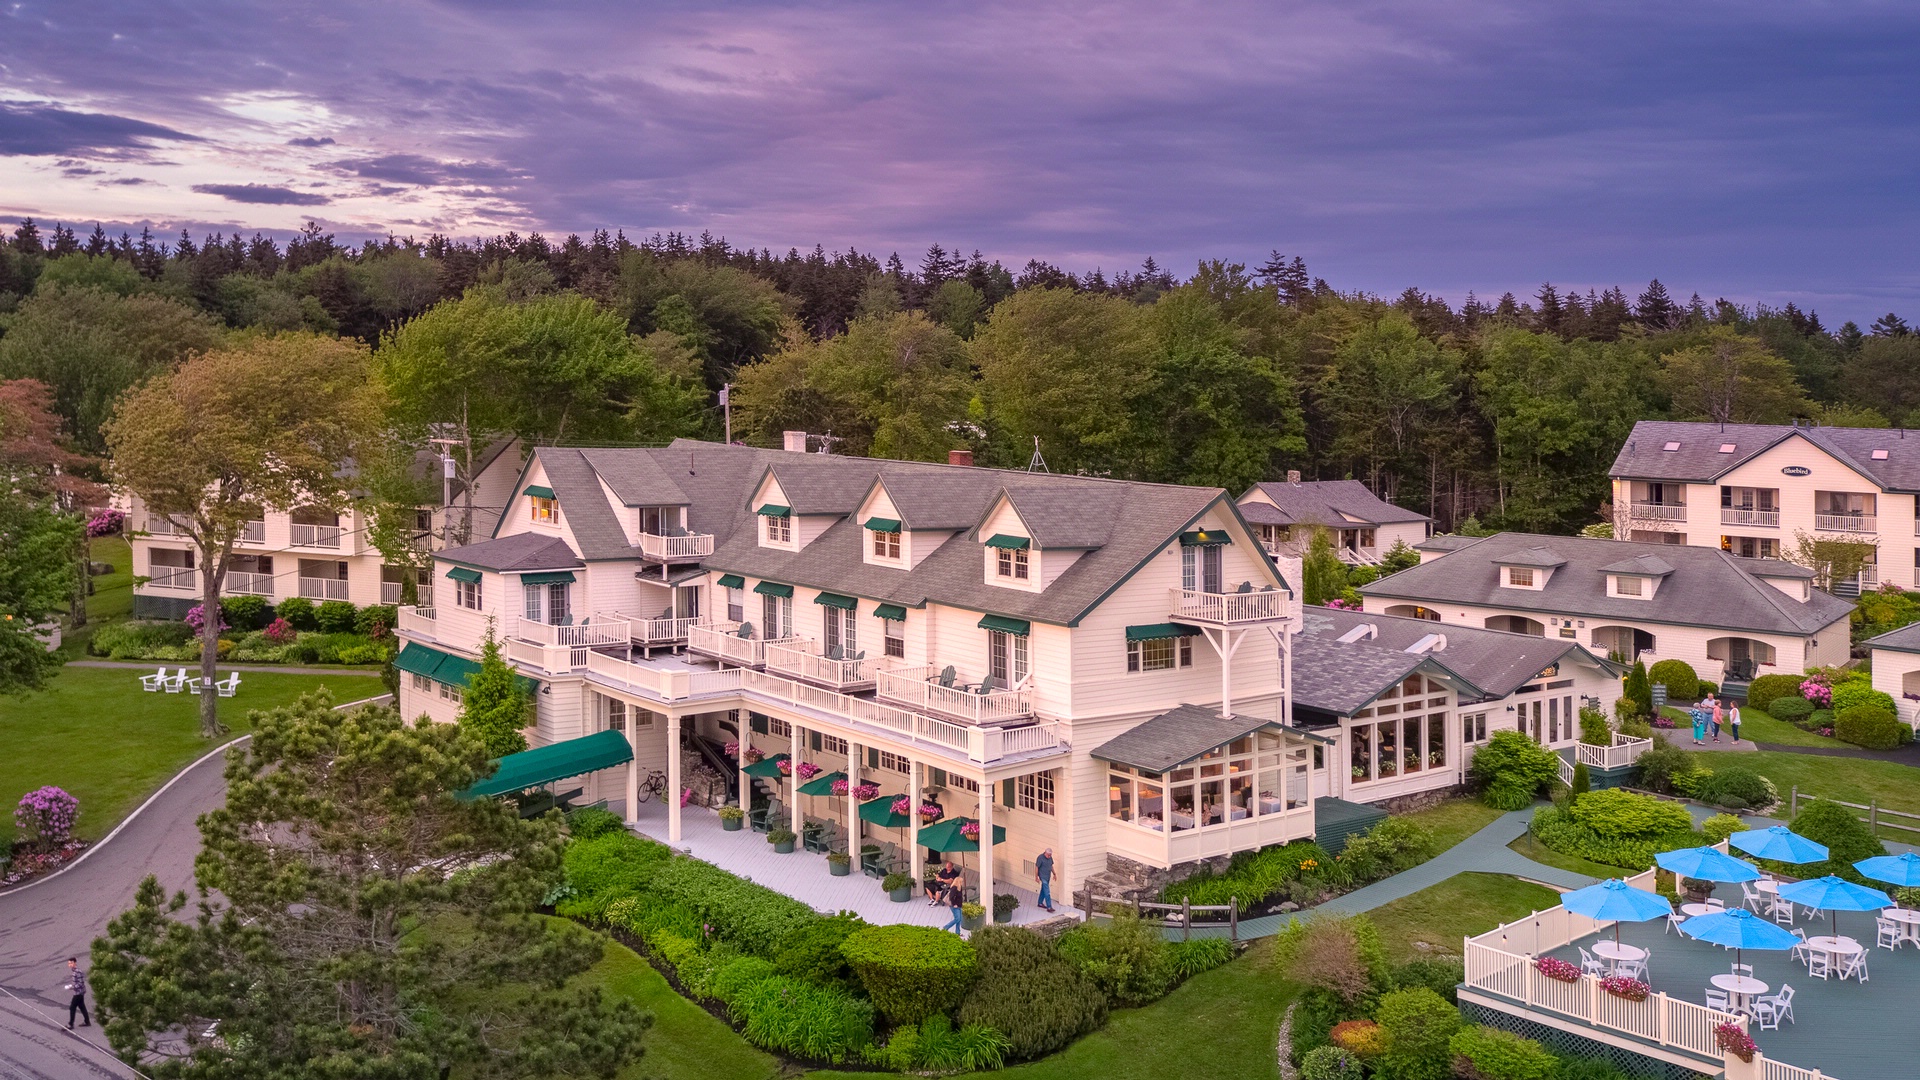 Top Hotels in Boothbay Harbor, ME - Cancel FREE on most hotels